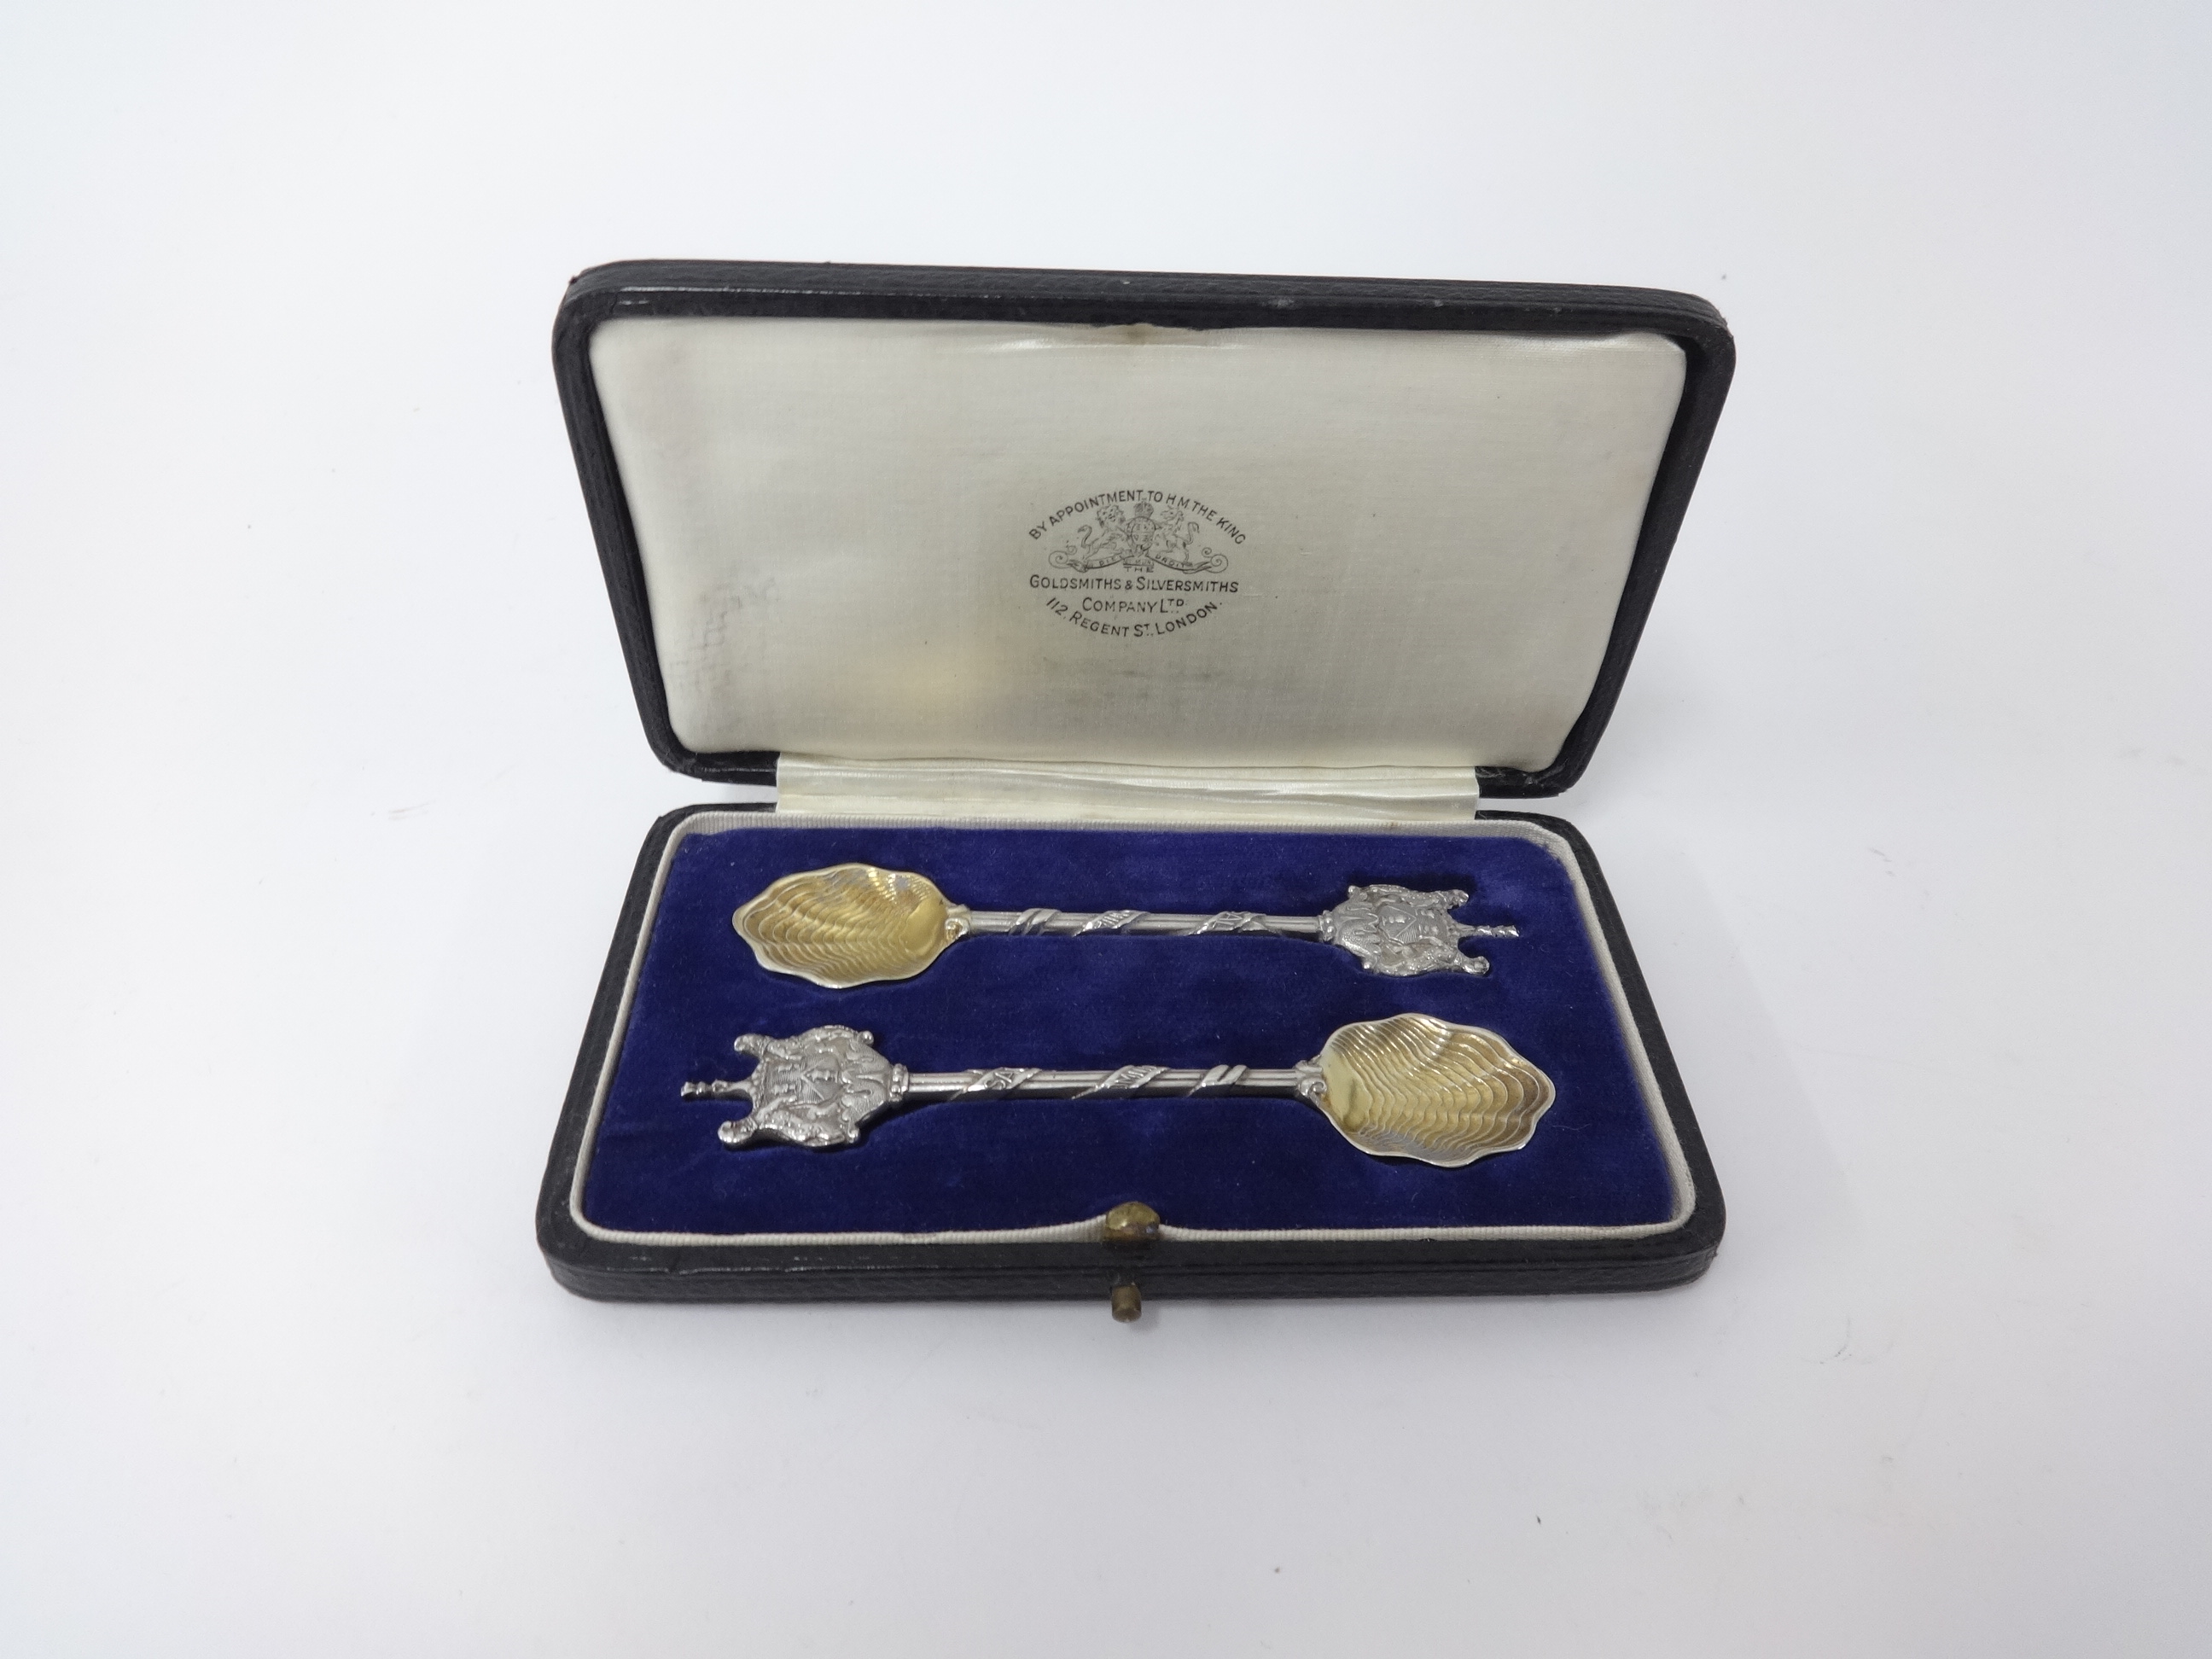 Salters Company, a pair of silver and gilt presentation spoons with certificate, cased.